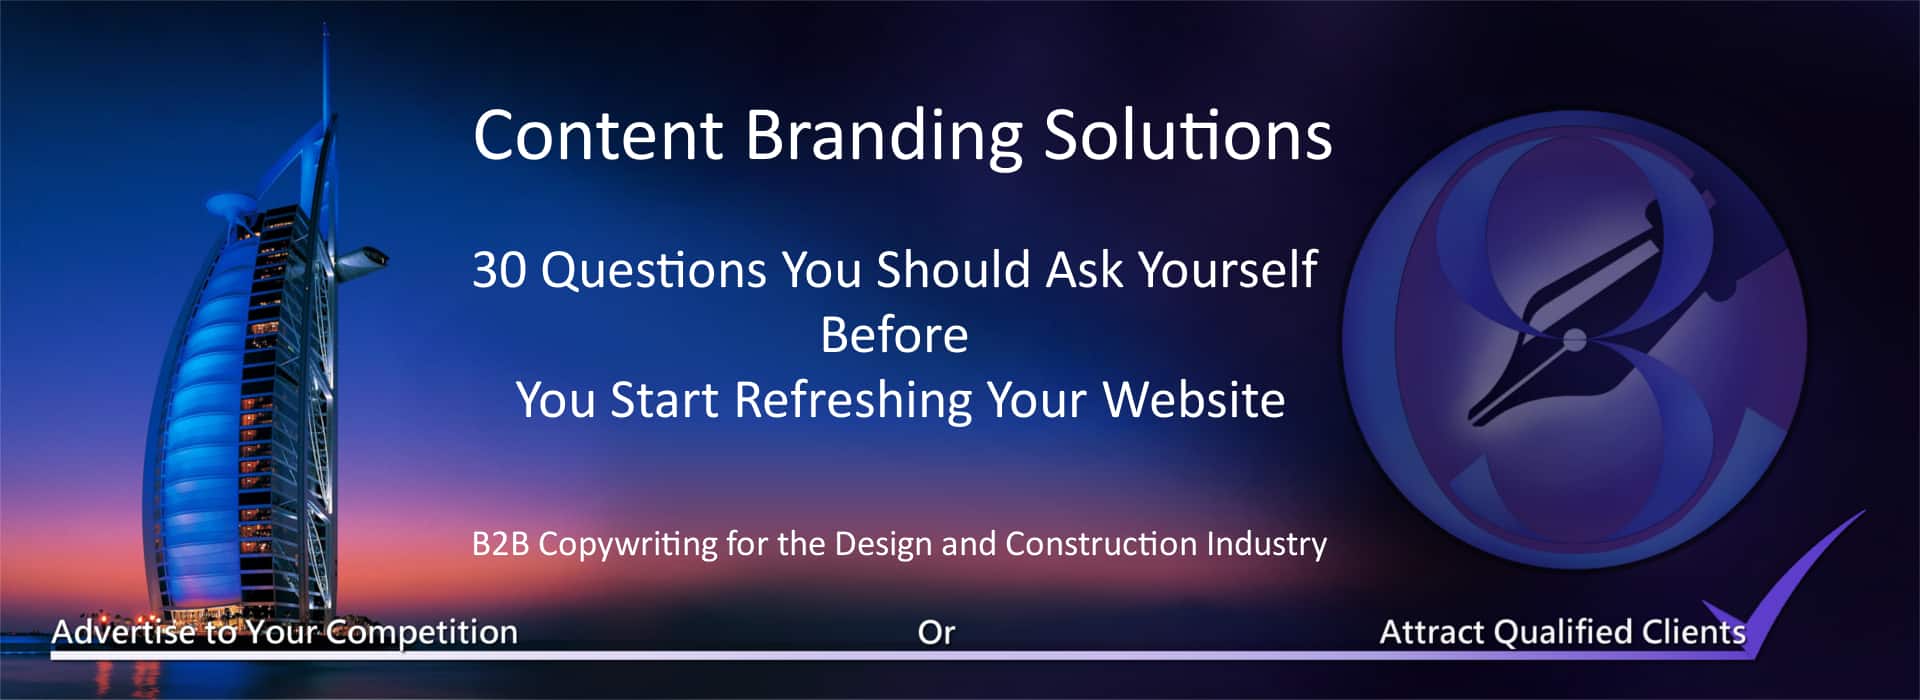 Content Branding Solutions Persuasive Architectural copy, graphics and illustrations